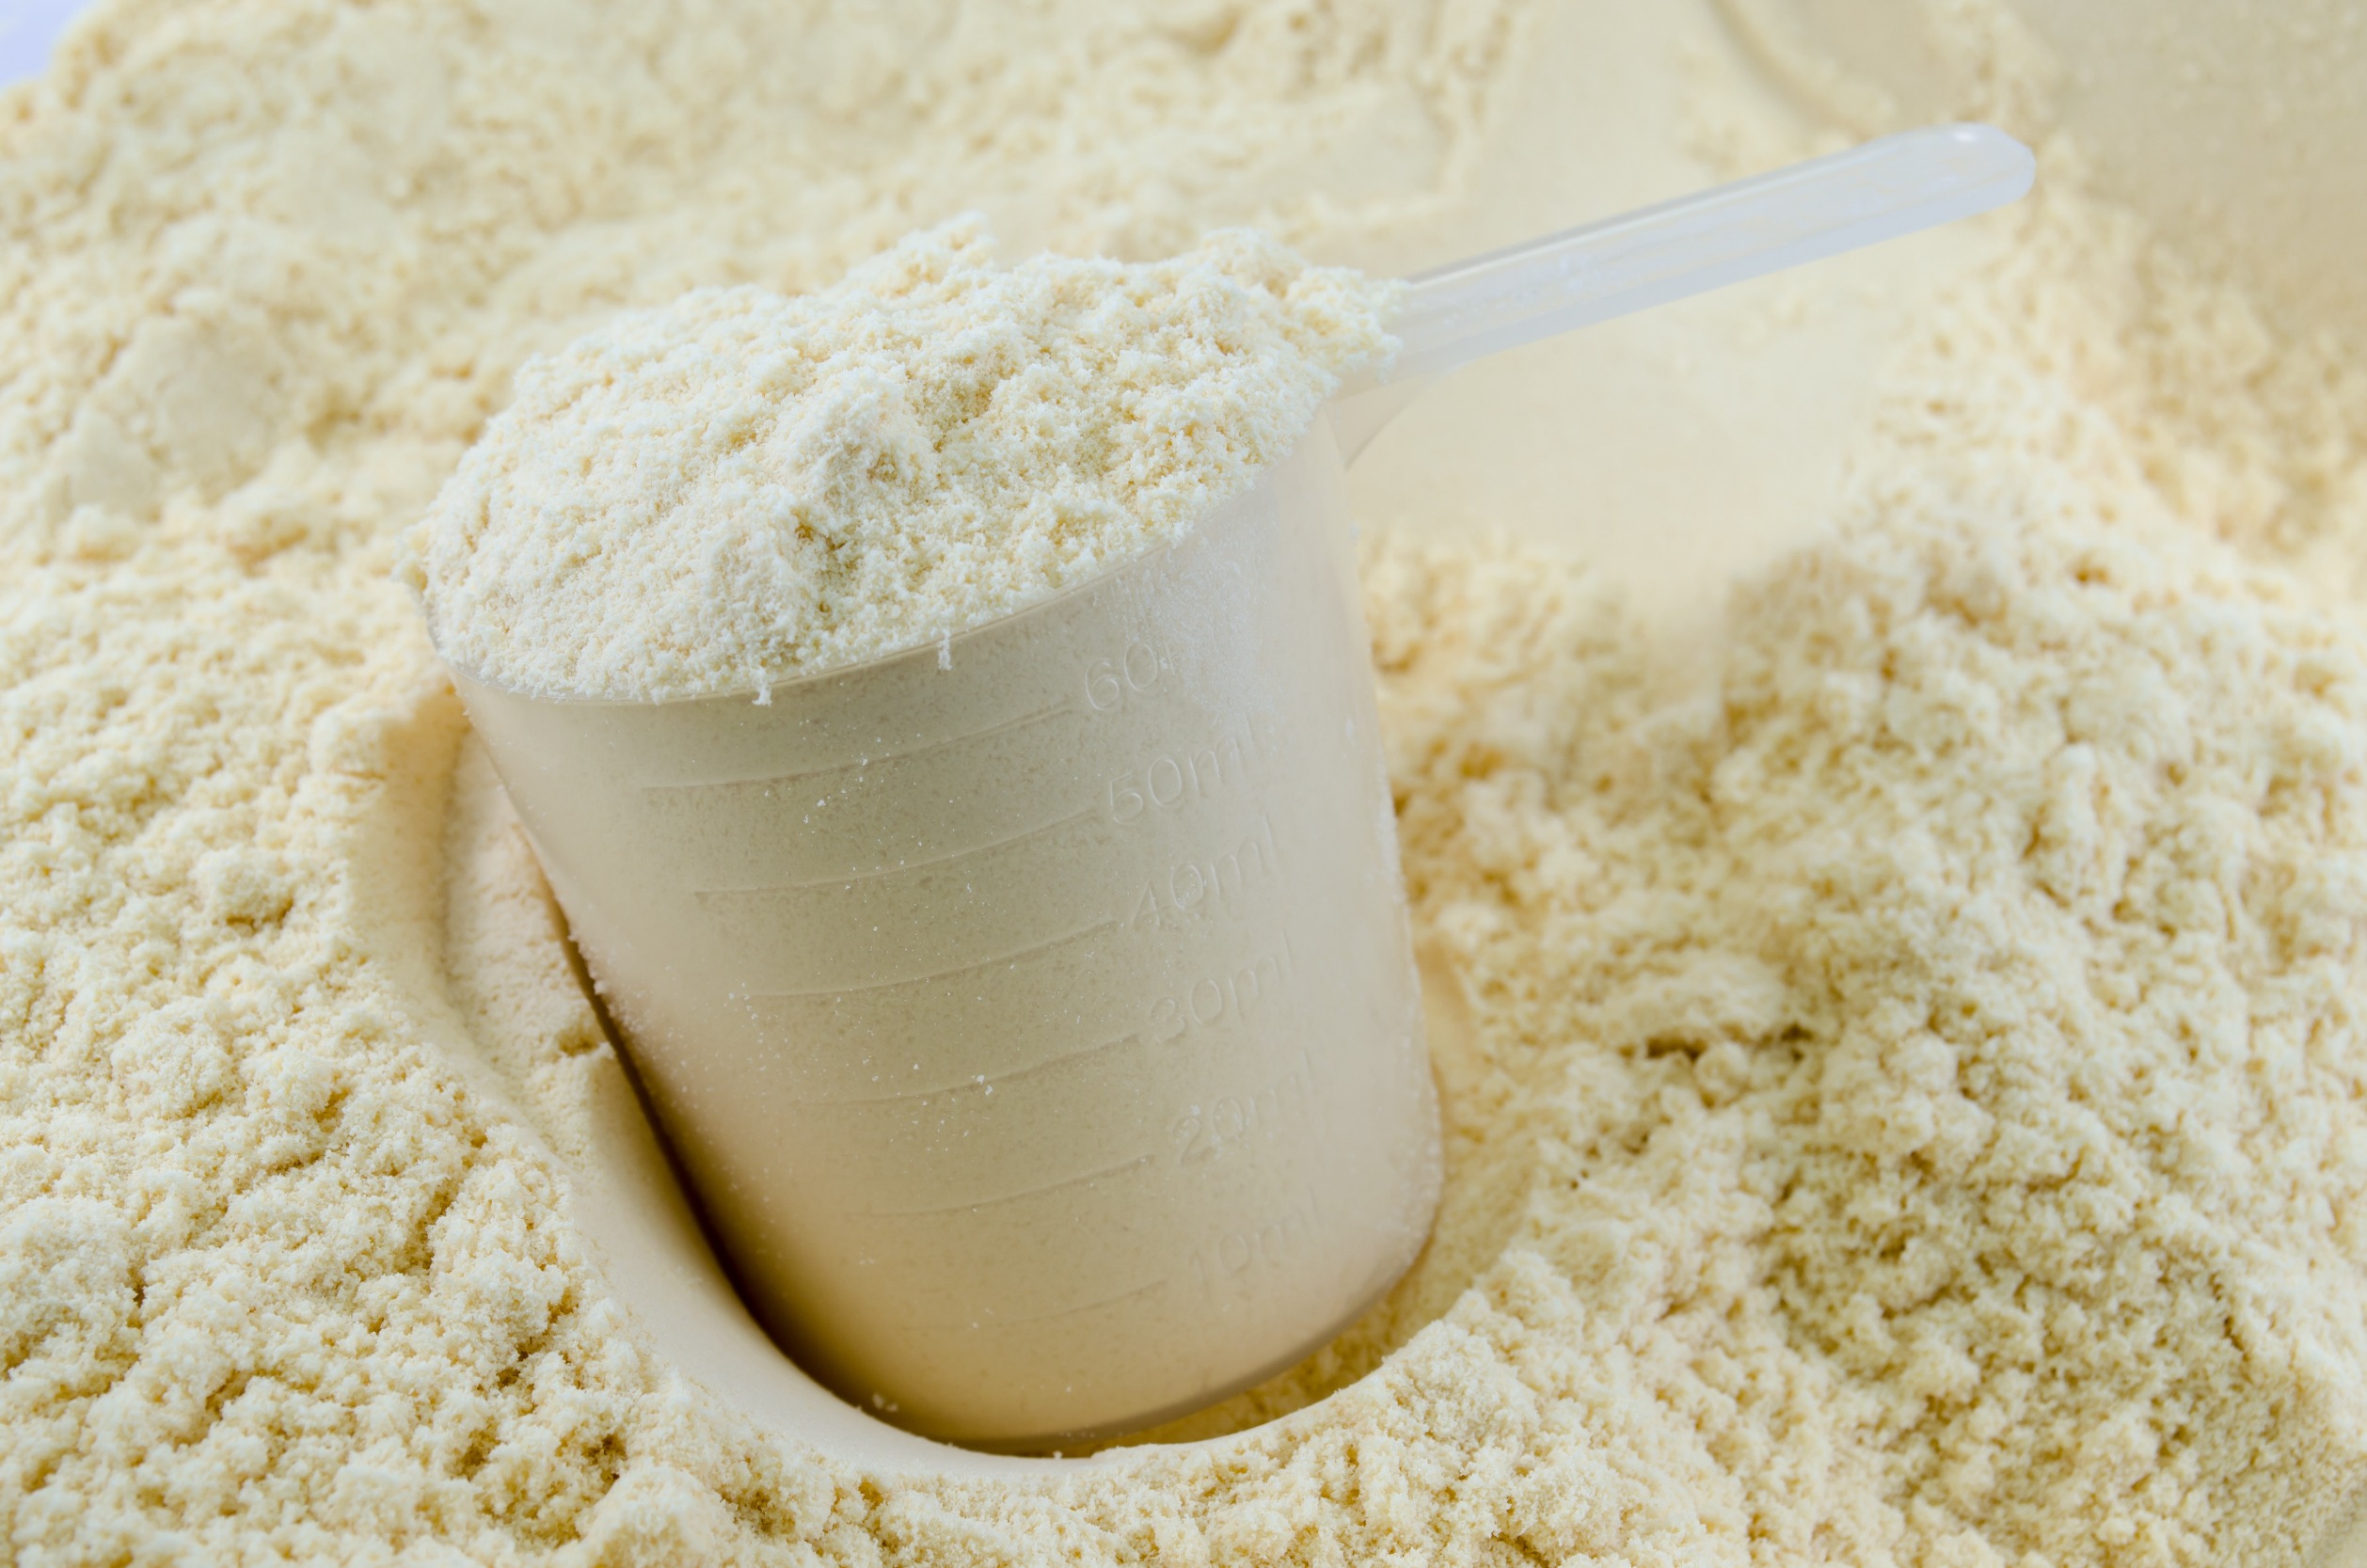 A large scooper full of pea protein set in a large pile of bulk pea protein